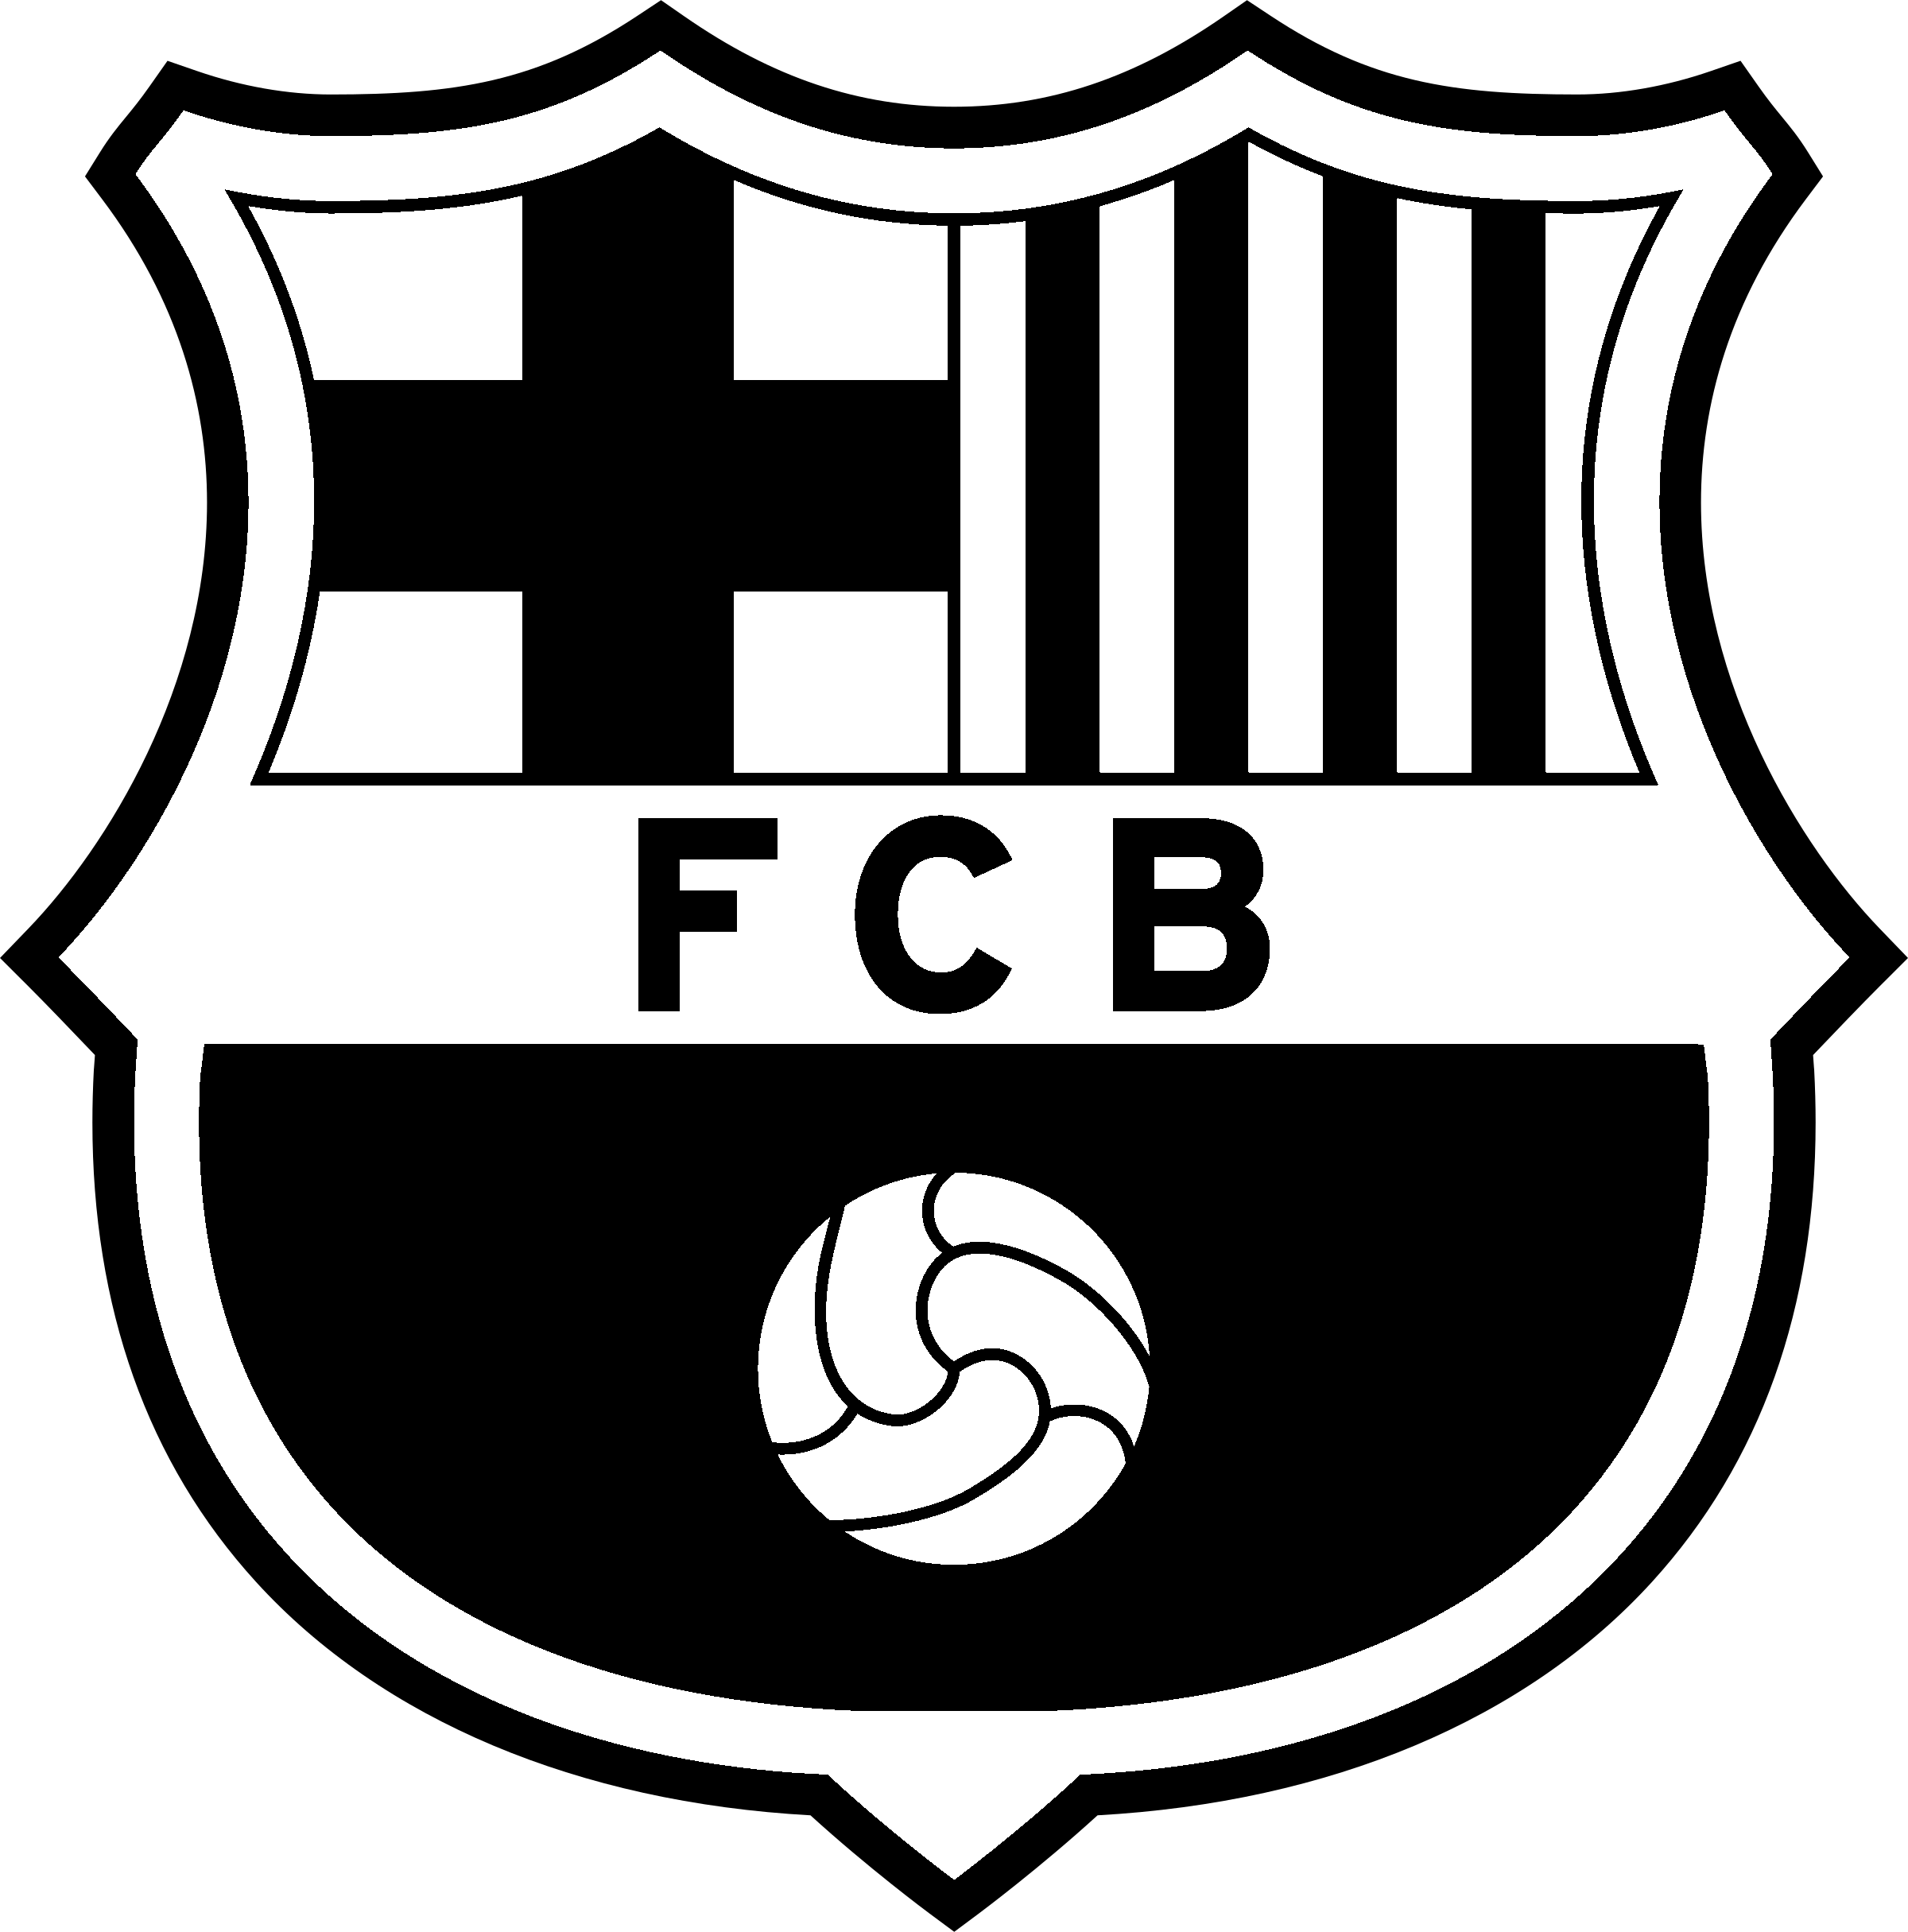 FC Barcelona Logo Silhouette PNG Clipart Background